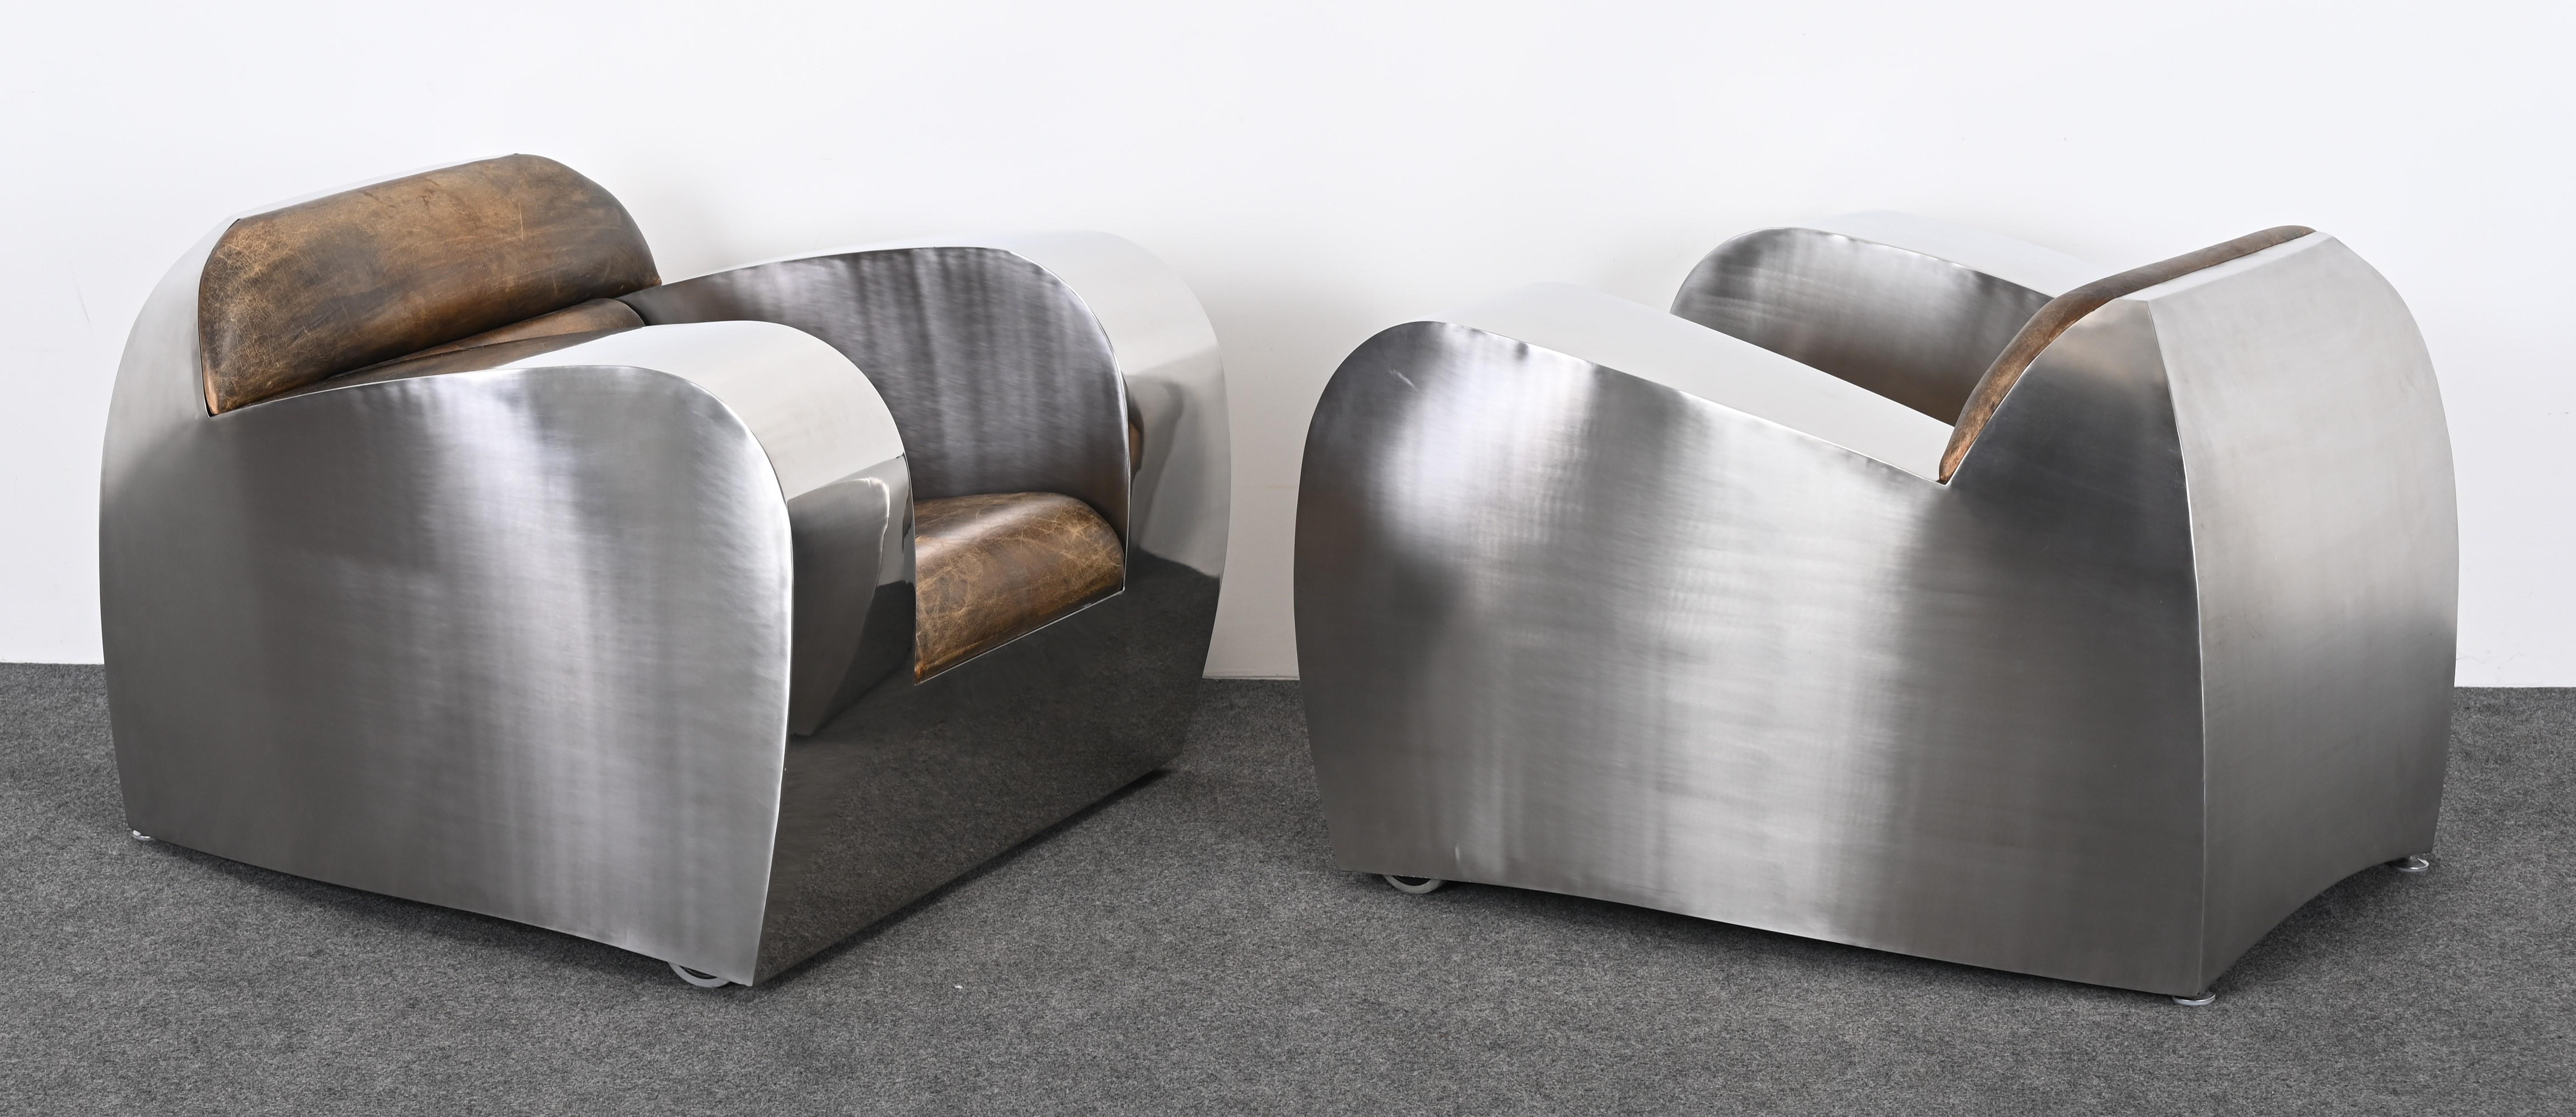 A magnificent stainless steel and leather club chairs or armchairs by Jonathan Singleton, 1980s-1990s. This fabulous pair of chairs fall into the art furniture category. Designed by metal artist and sculptor Jonathan Singleton and created in his